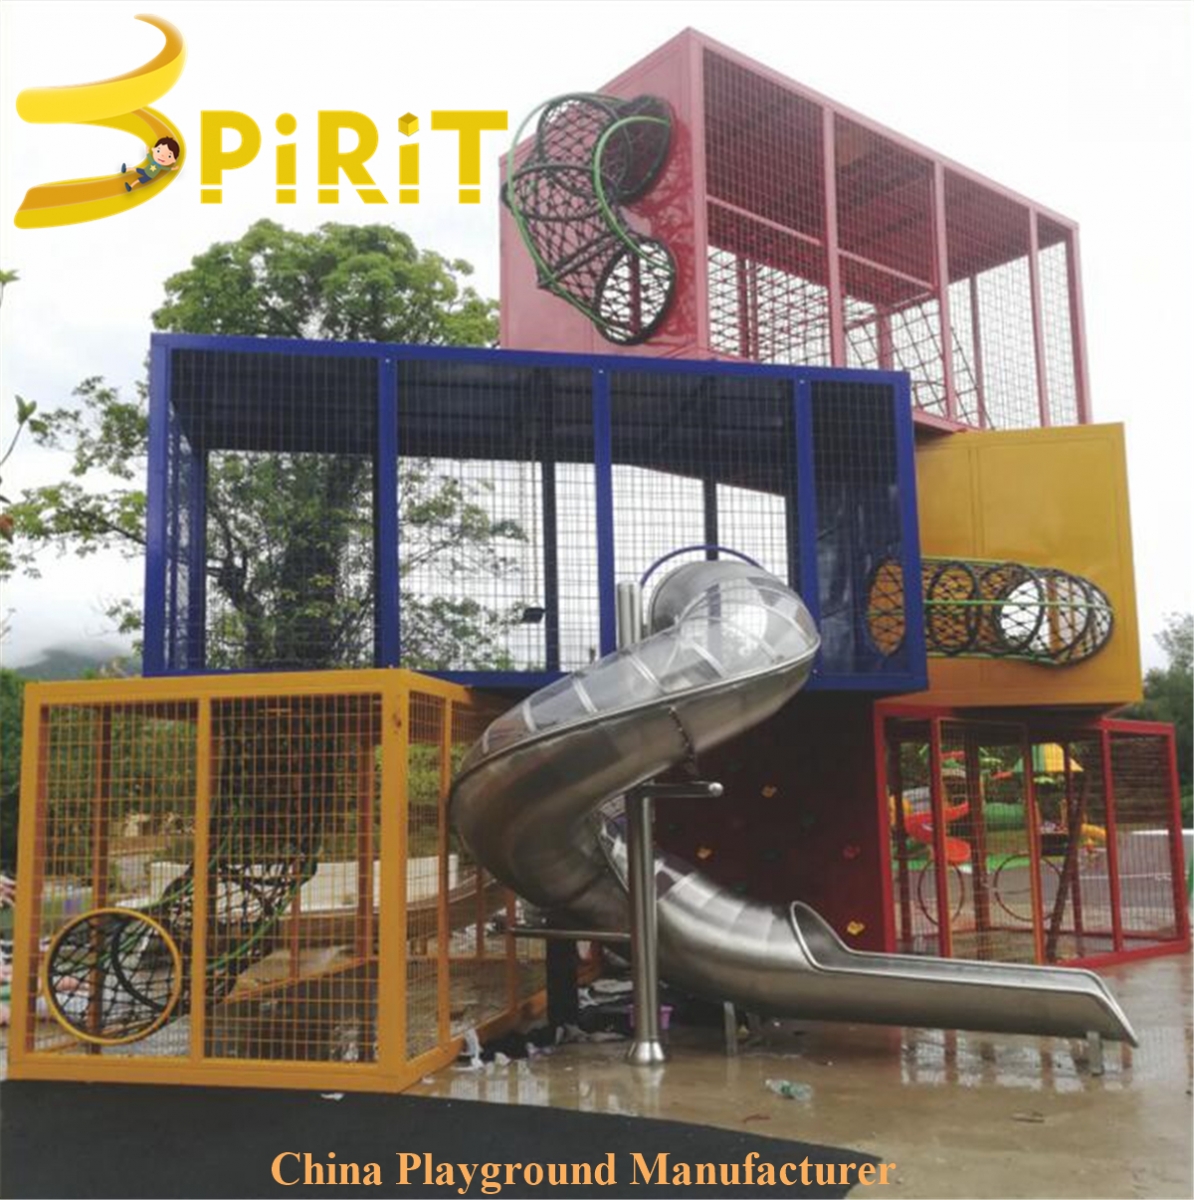 Why more and more persons like themed Play in park?-SPIRIT PLAY,Outdoor Playground, Indoor Playground,Trampoline Park,Outdoor Fitness,Inflatable,Soft Playground,Ninja Warrior,Trampoline Park,Playground Structure,Play Structure,Outdoor Fitness,Water Park,Play System,Freestanding,Interactive,independente ,Inklusibo, Park, Pagsaka sa Bungbong, Dula sa Bata